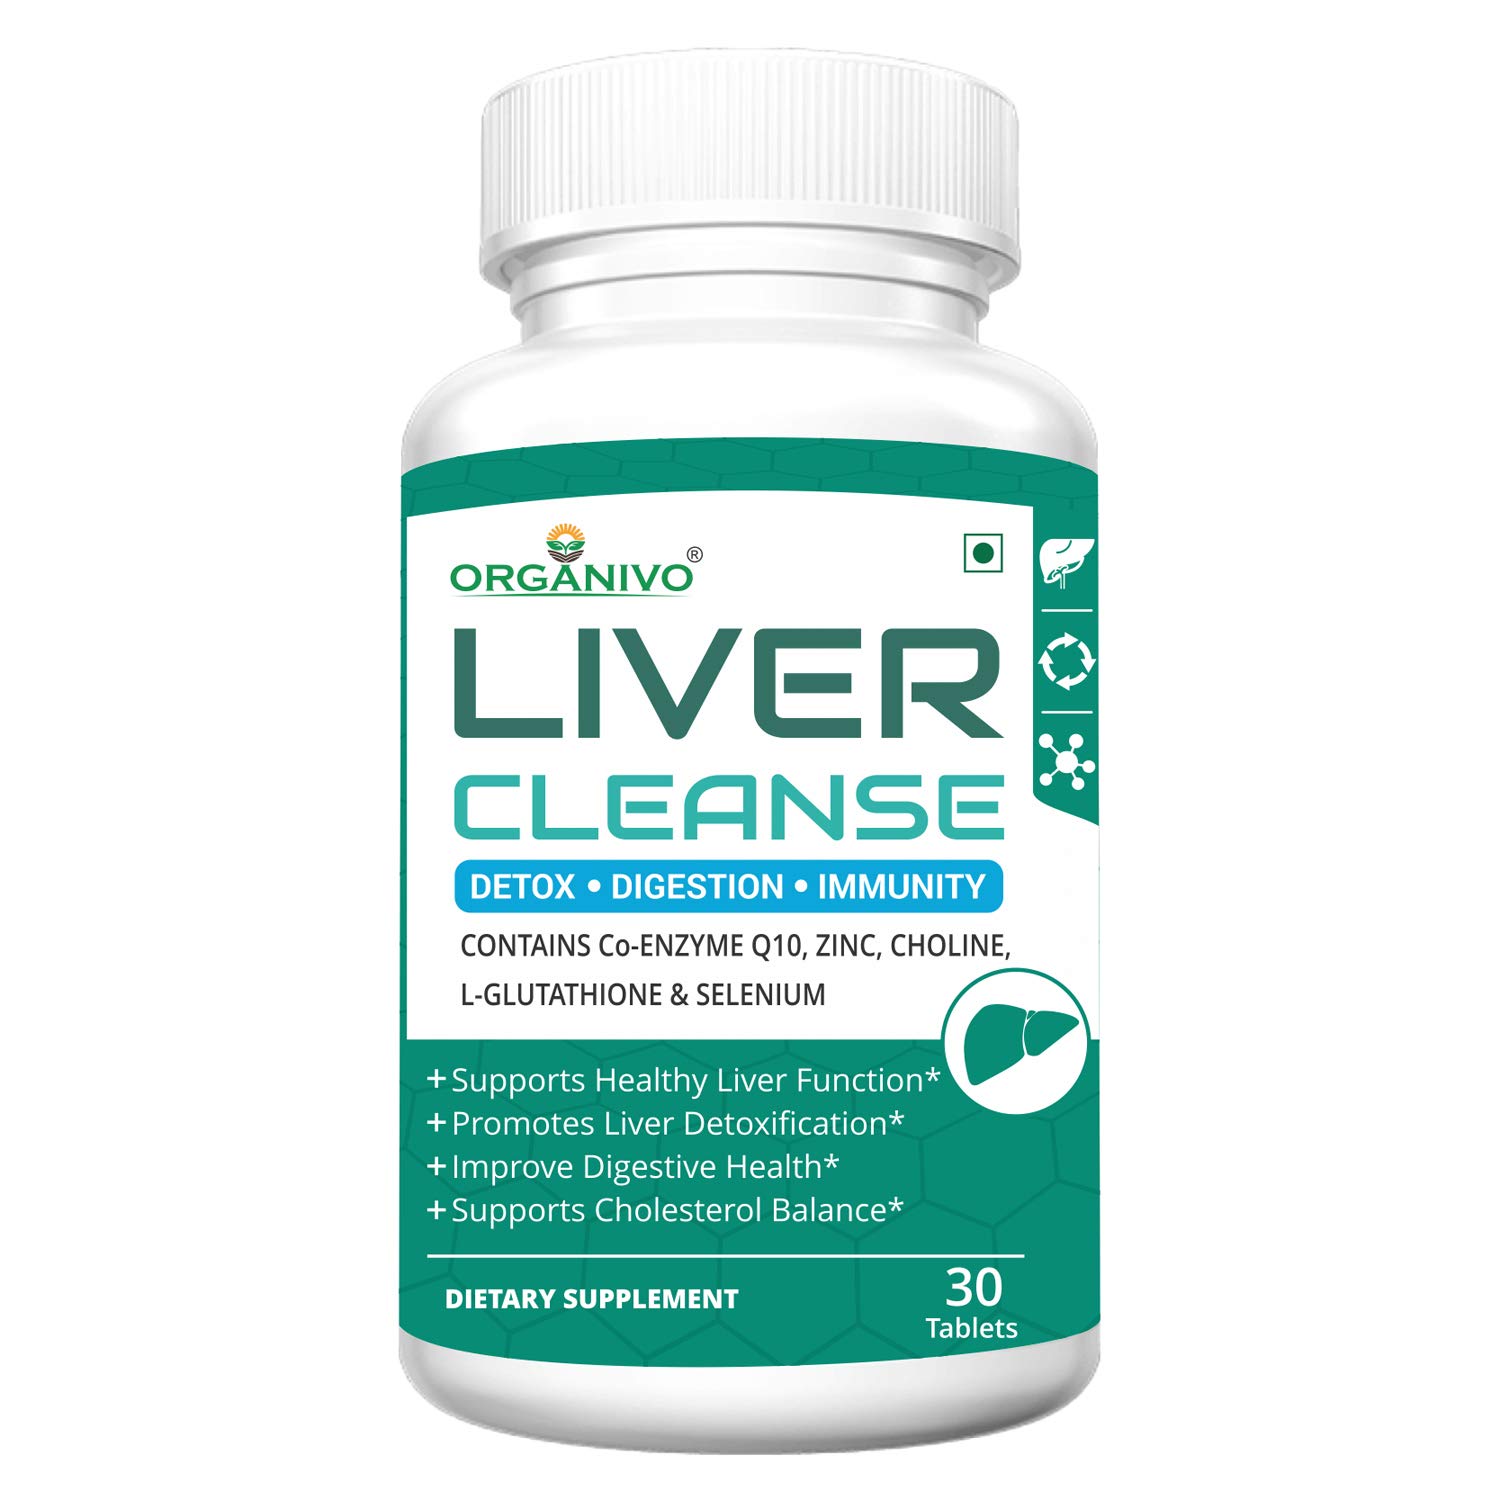 Organivo Liver Cleanser Image